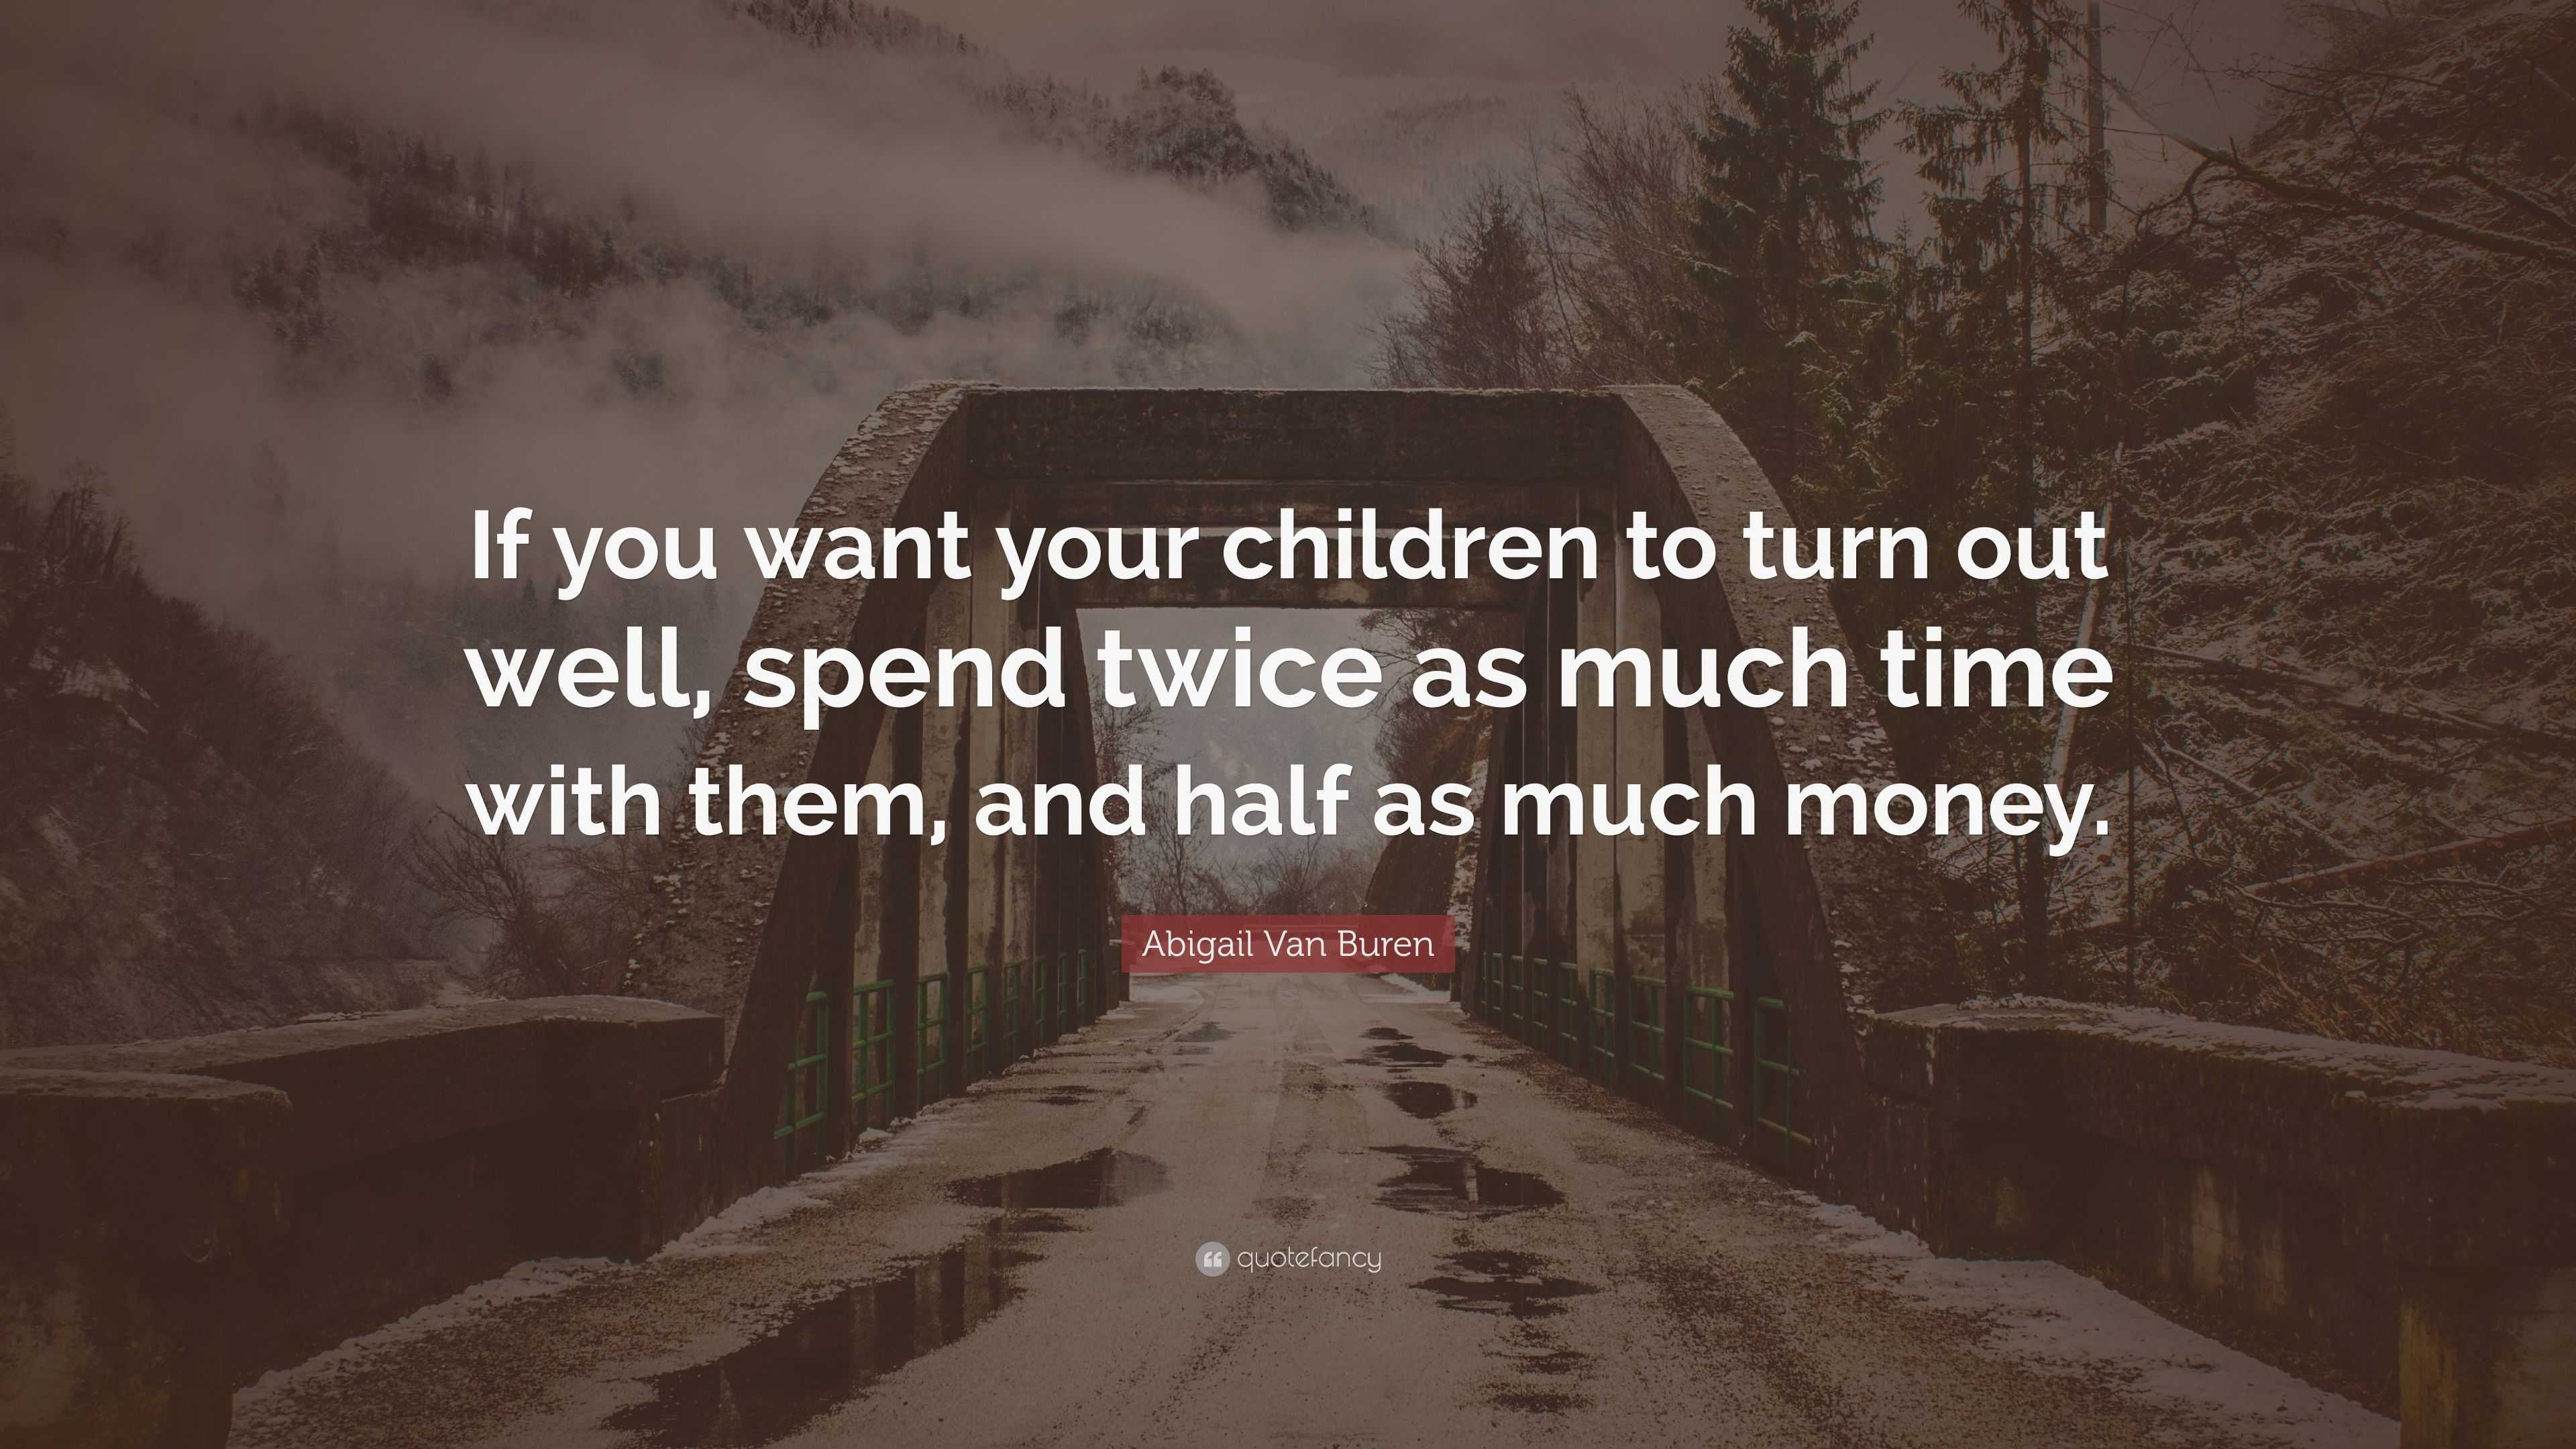 Abigail Van Buren Quote: “If you want your children to turn out well ...